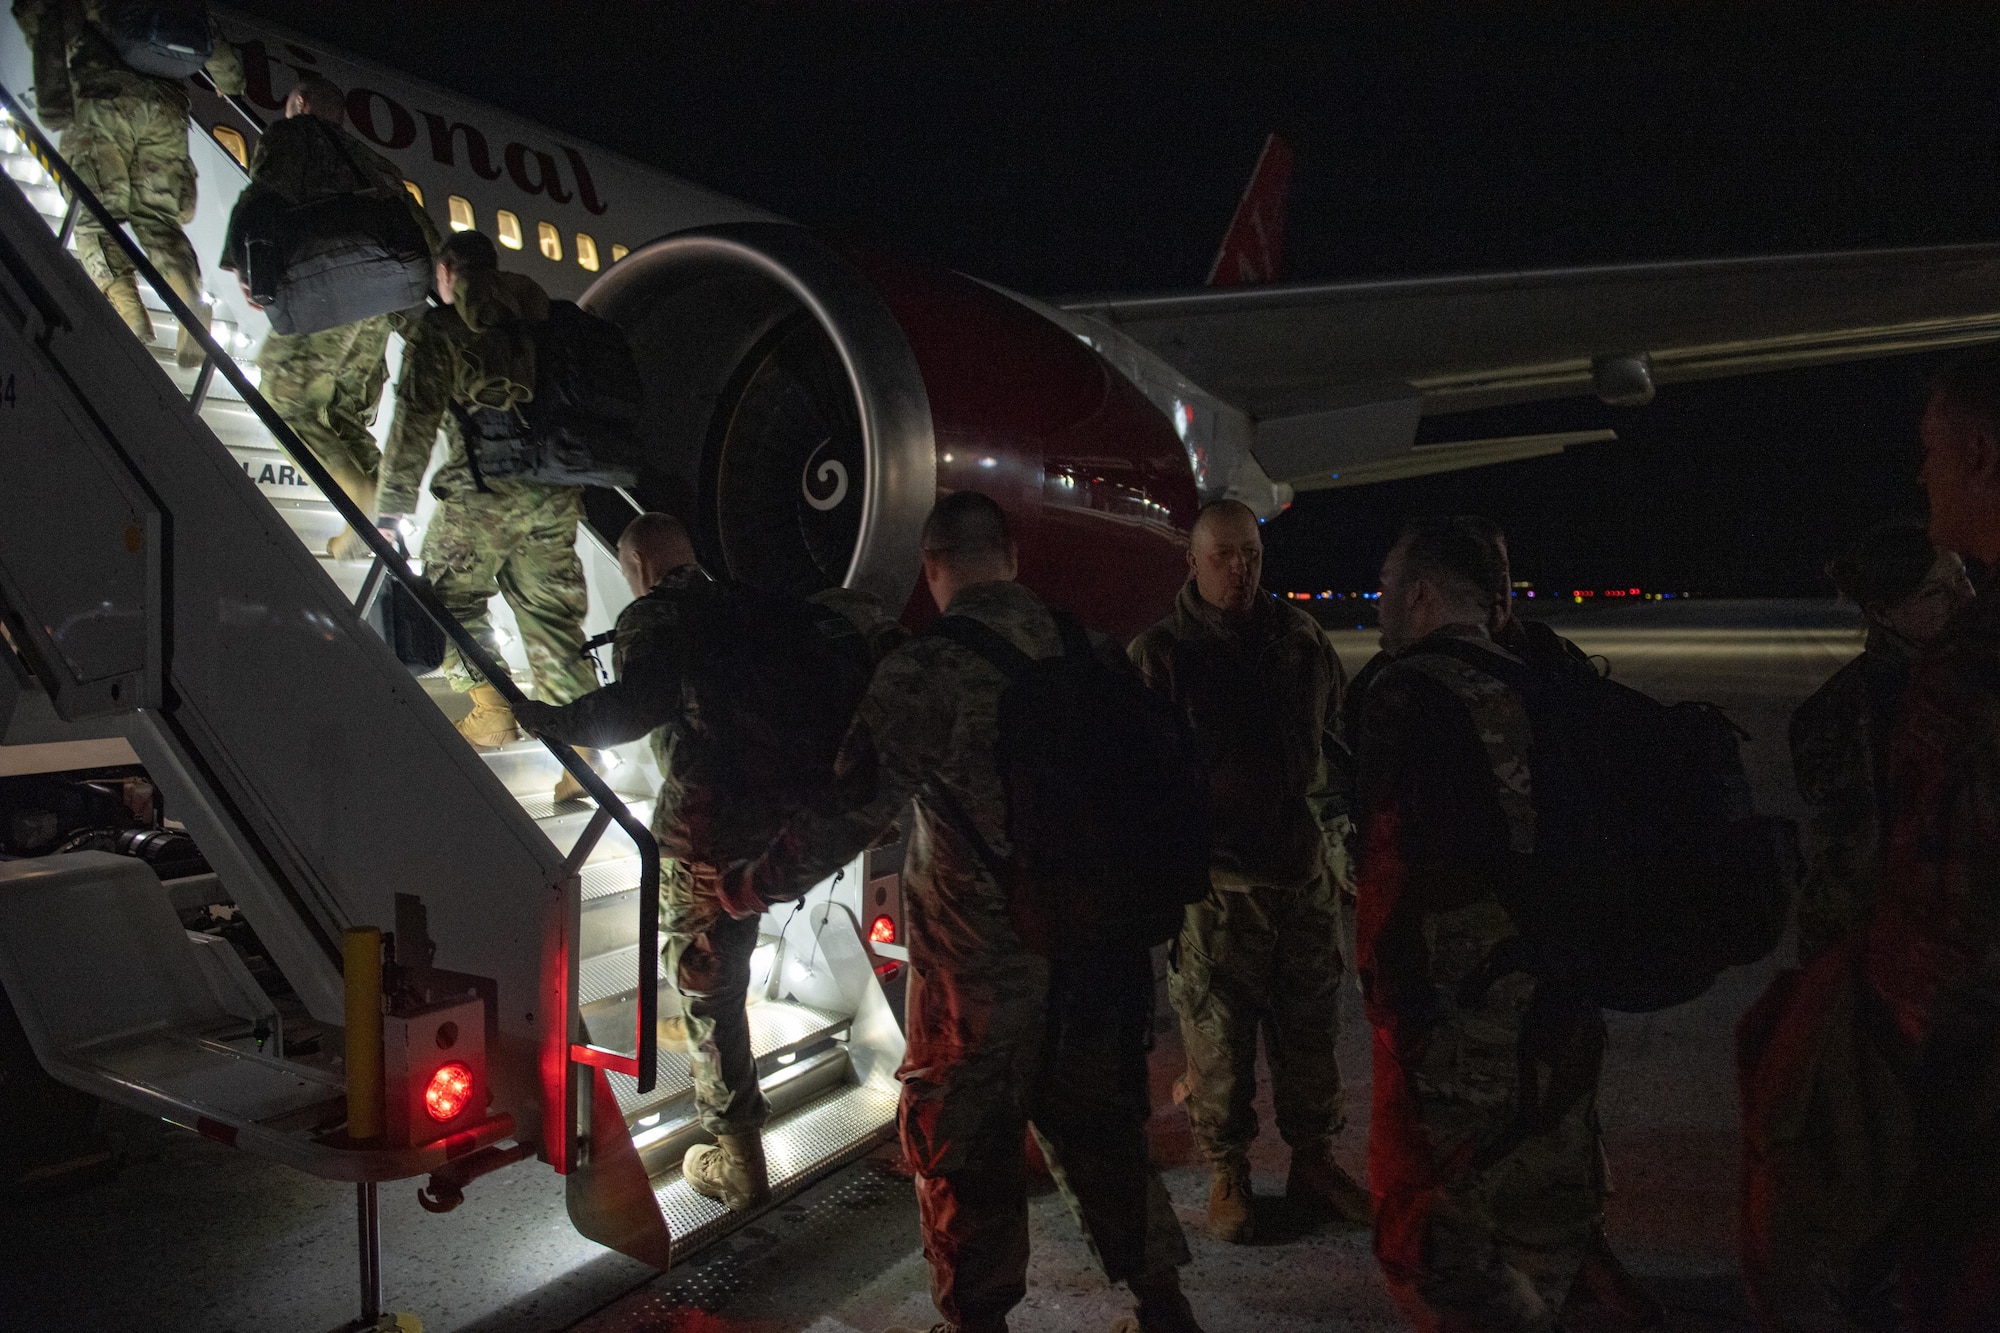 Photo of Airmen from the Vermont Air National Guard boarding a plane for a deployment to Europe near midnight from the Vermont Air National Guard Base, South Burlington, Vermont, April 29, 2022.